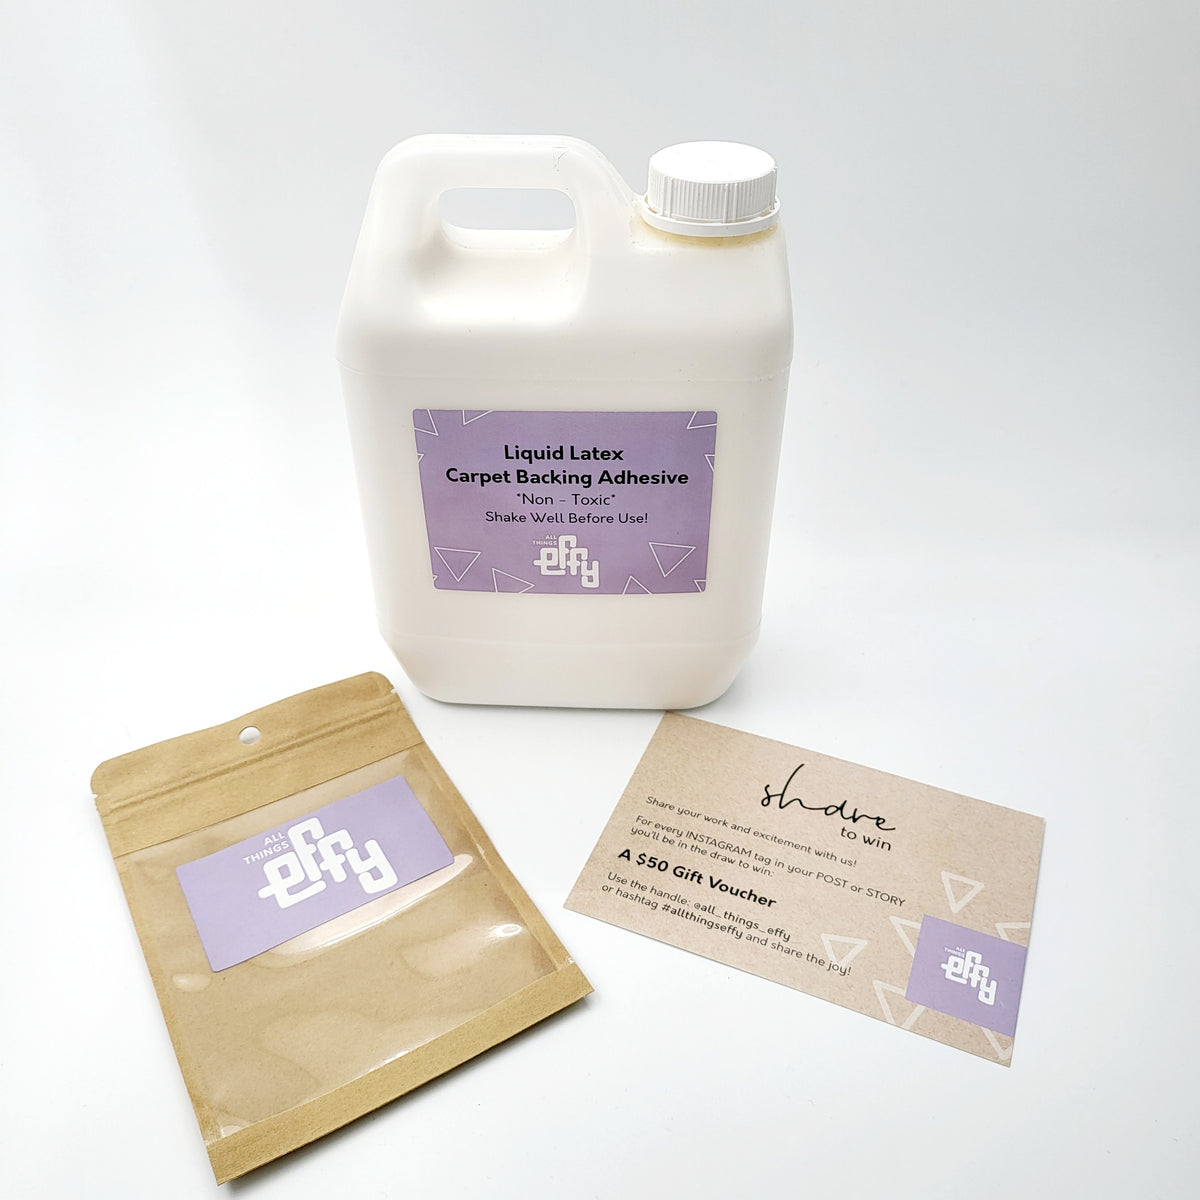 LATEX Adhesive for backing rugs! *Now shipping Worldwide!!*